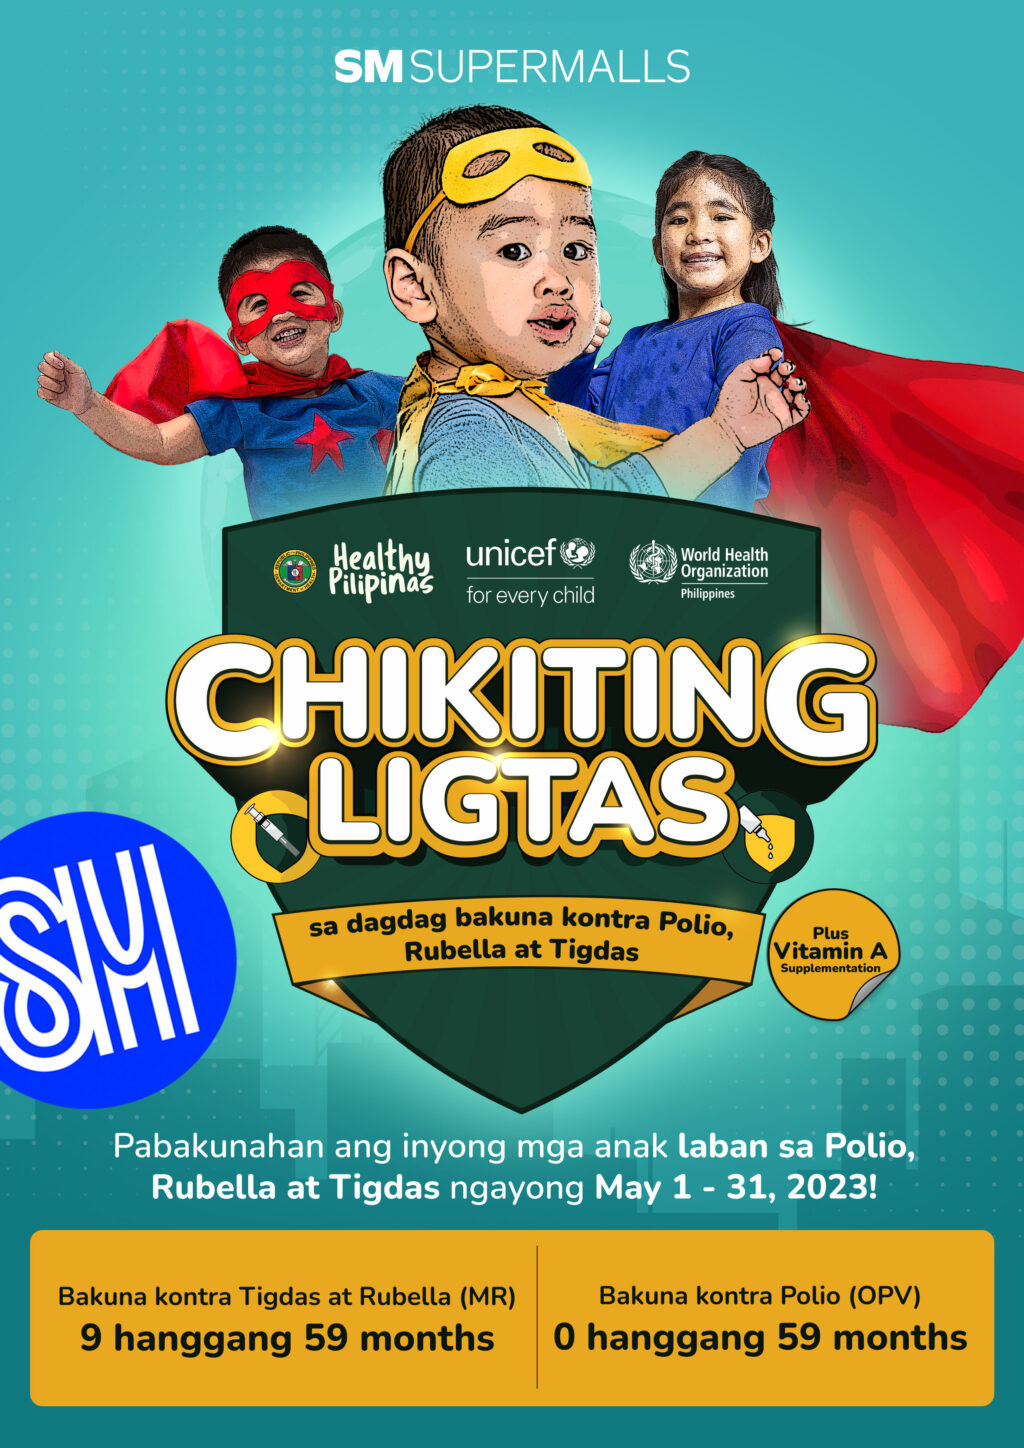 Chikiting Ligtas pedia vaccination in SM malls.